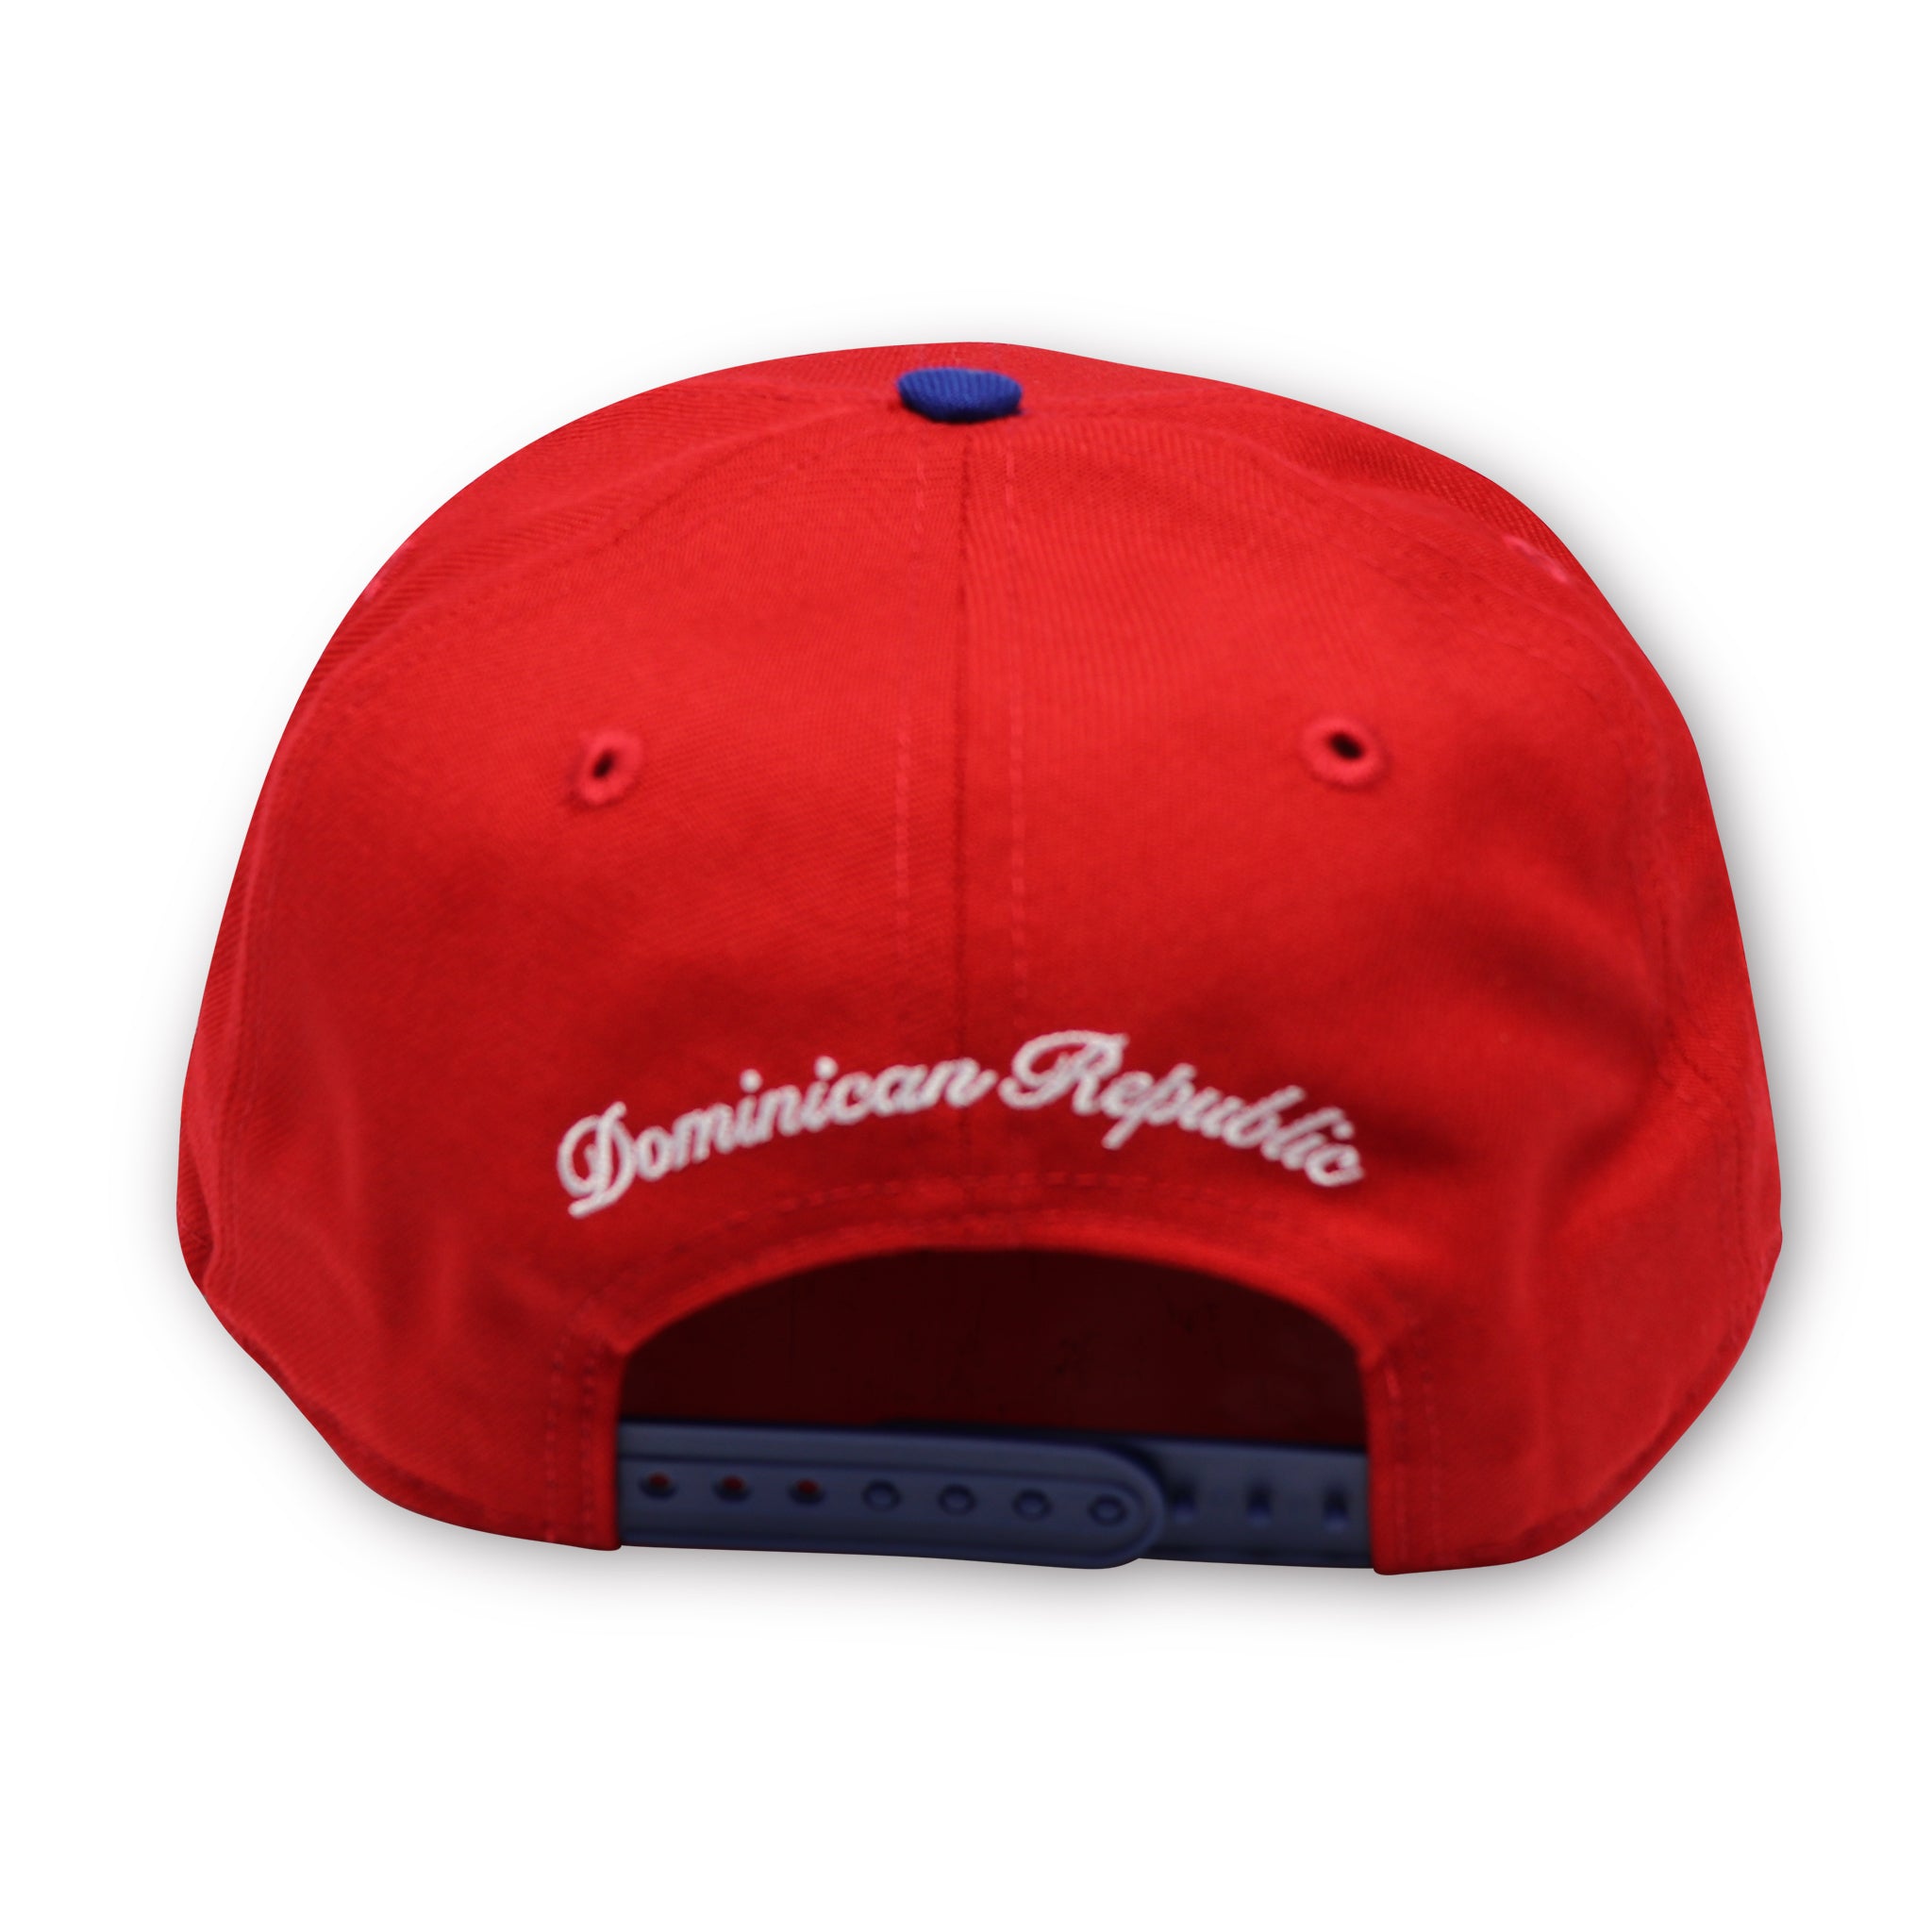 PAPER PLANES DOMINICAN REPUBLIC (RED/ROYAL) RETRO FIT SNAPBACK